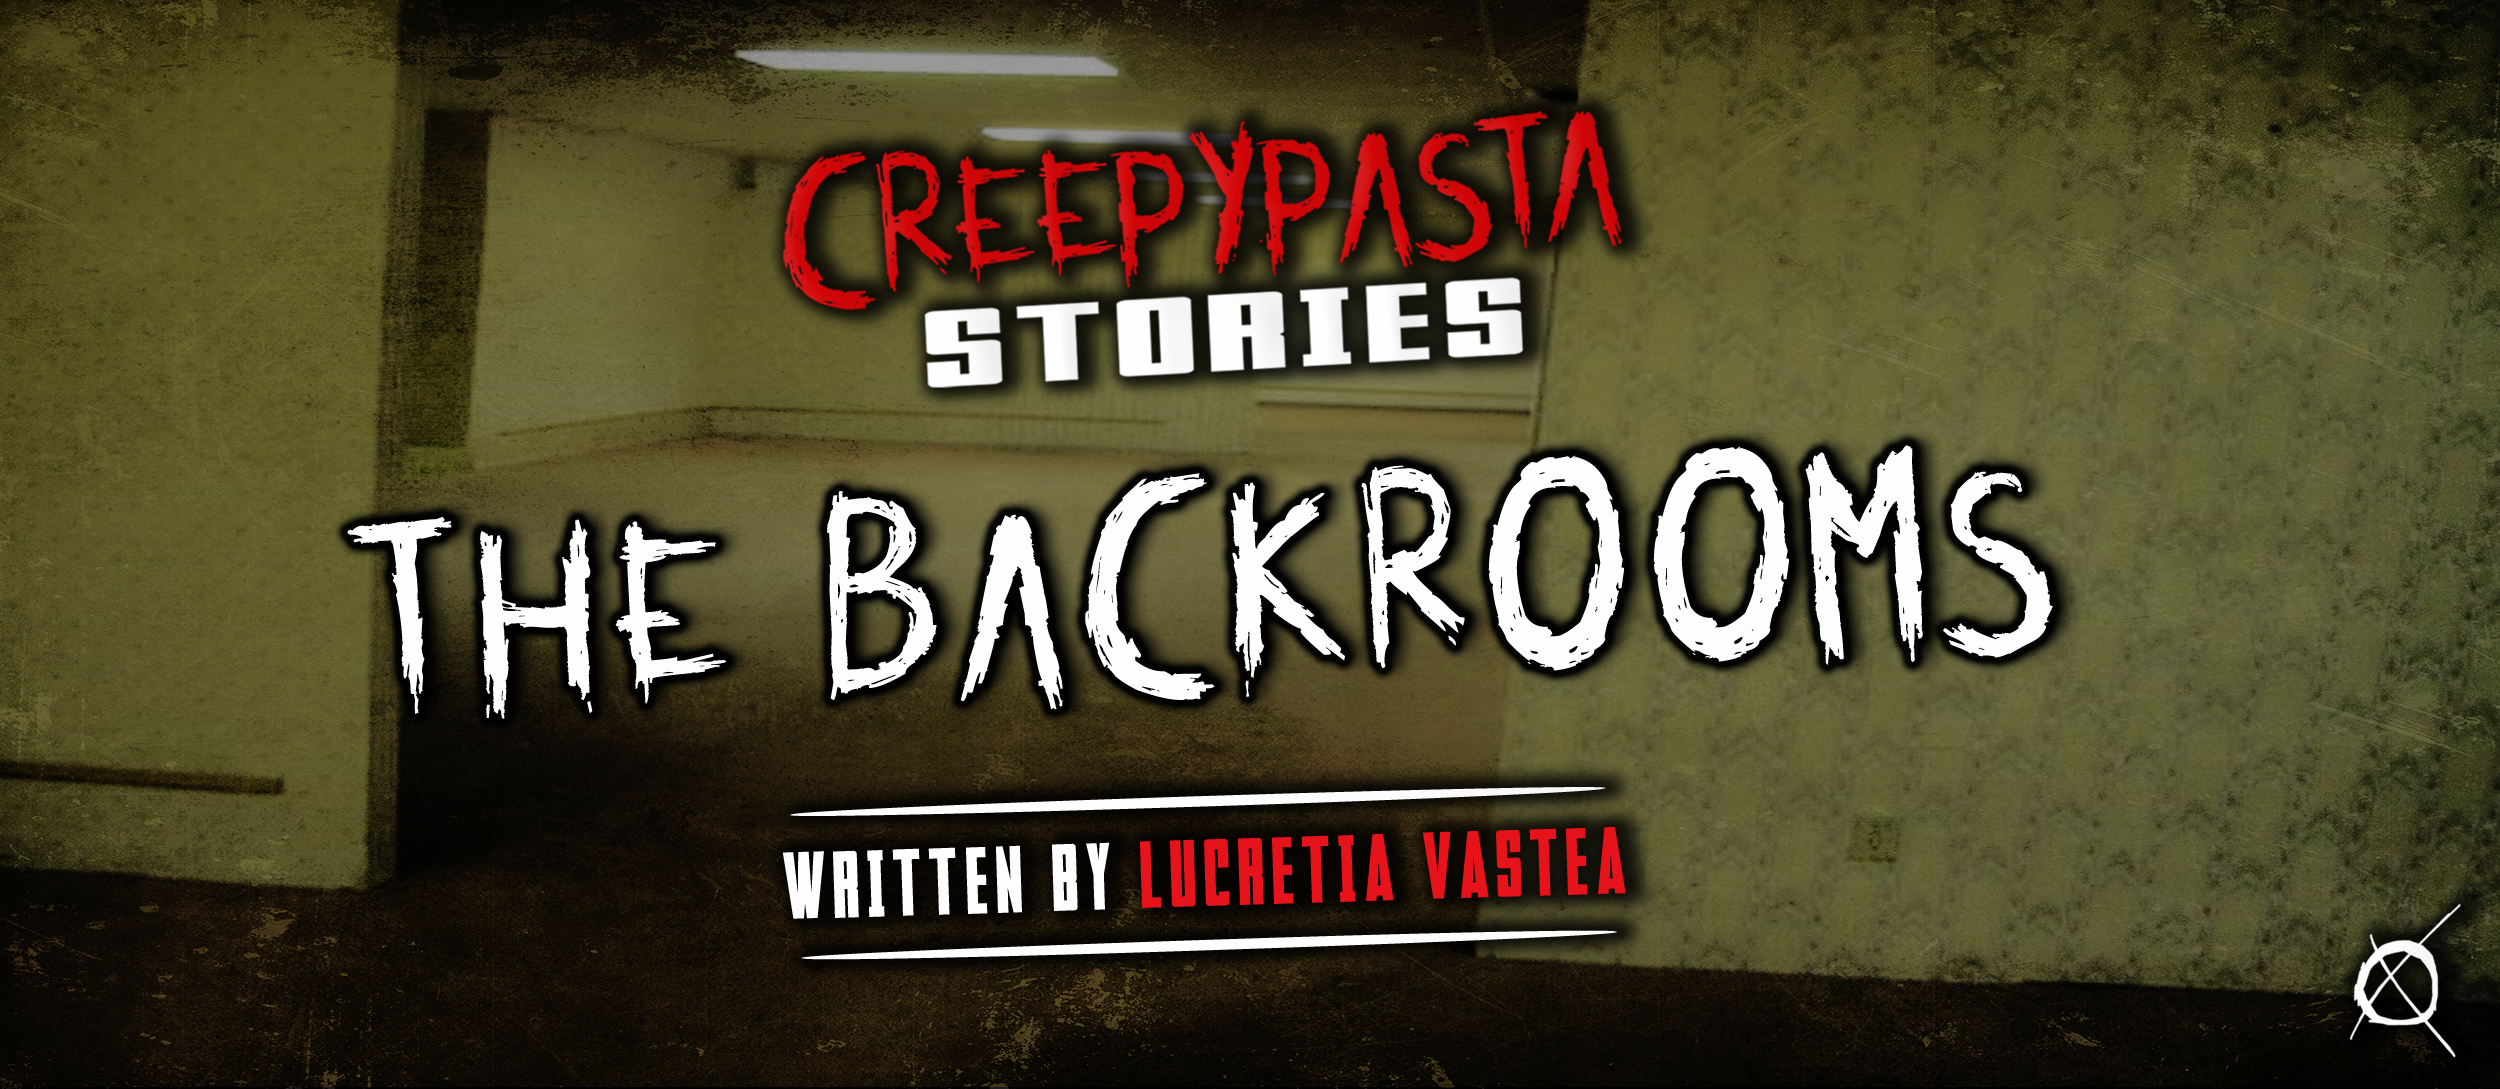 The Backrooms Explained (Very Creepy), The Backrooms